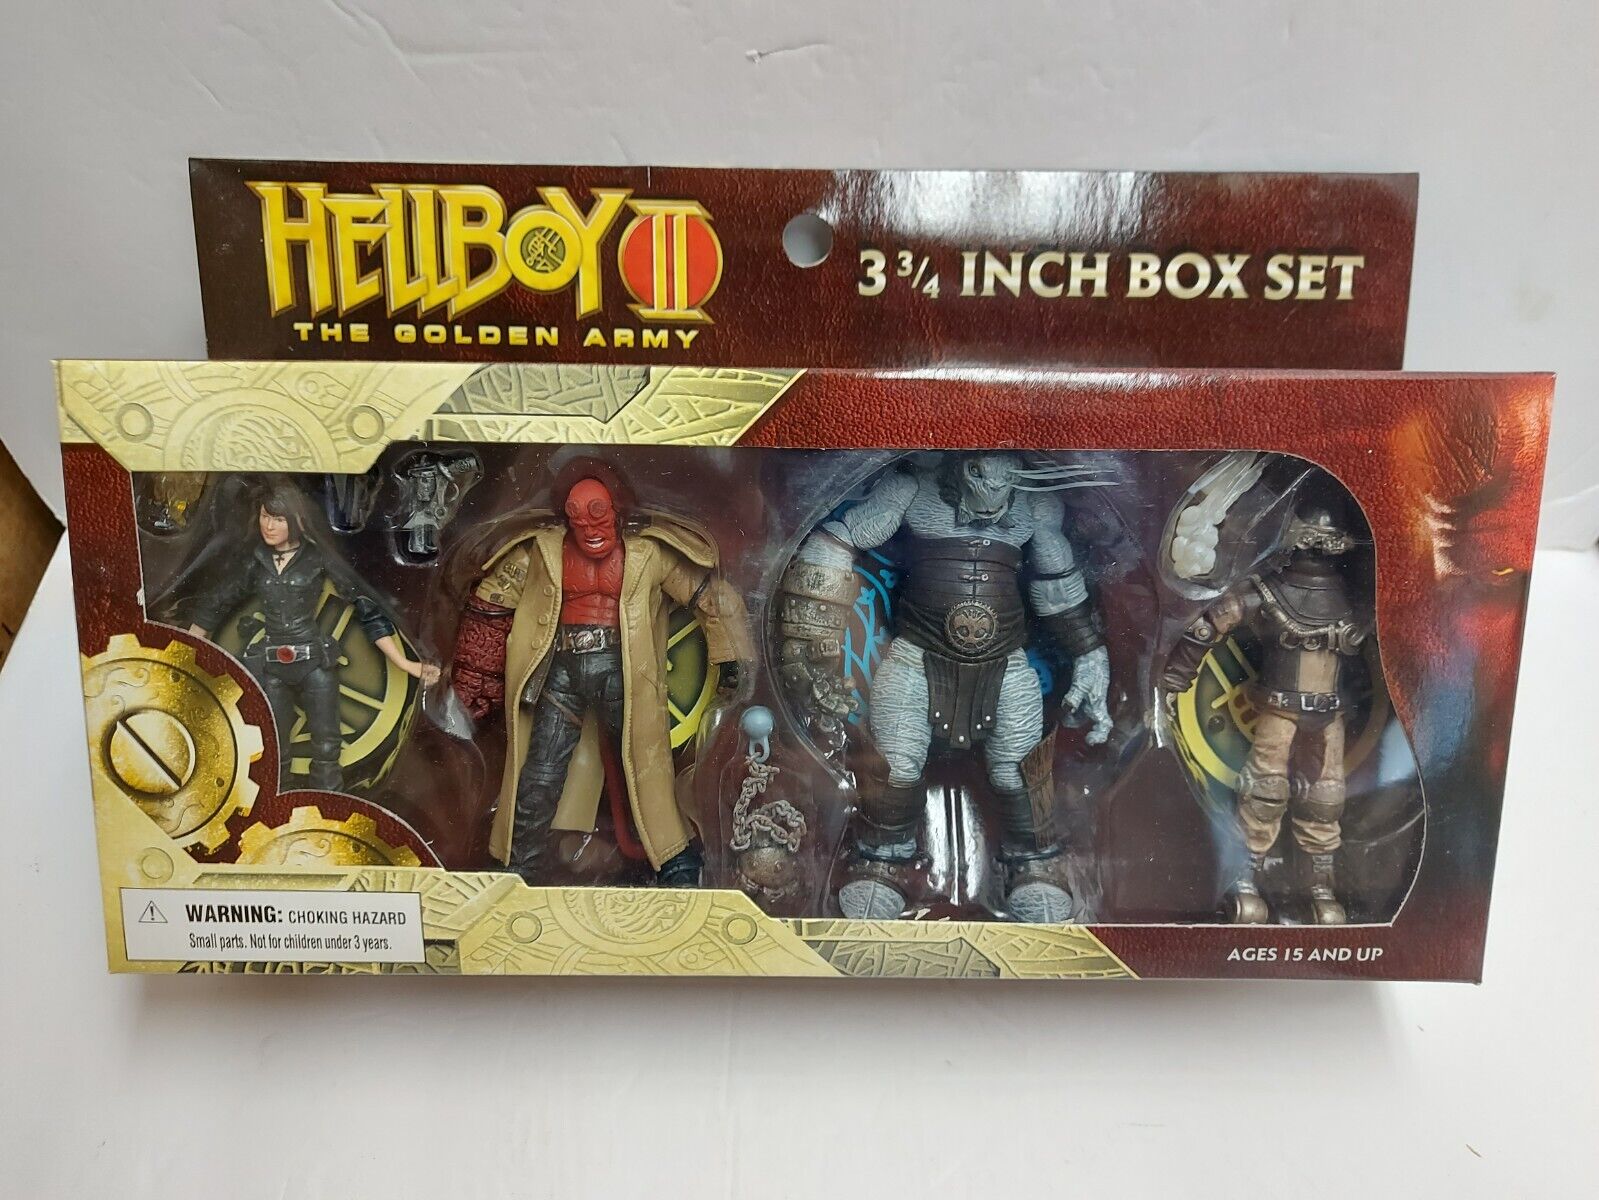 2008 Hellboy 2 The Golden Army Box Set 3 3/4 Figures 4 Pack - New Sealed